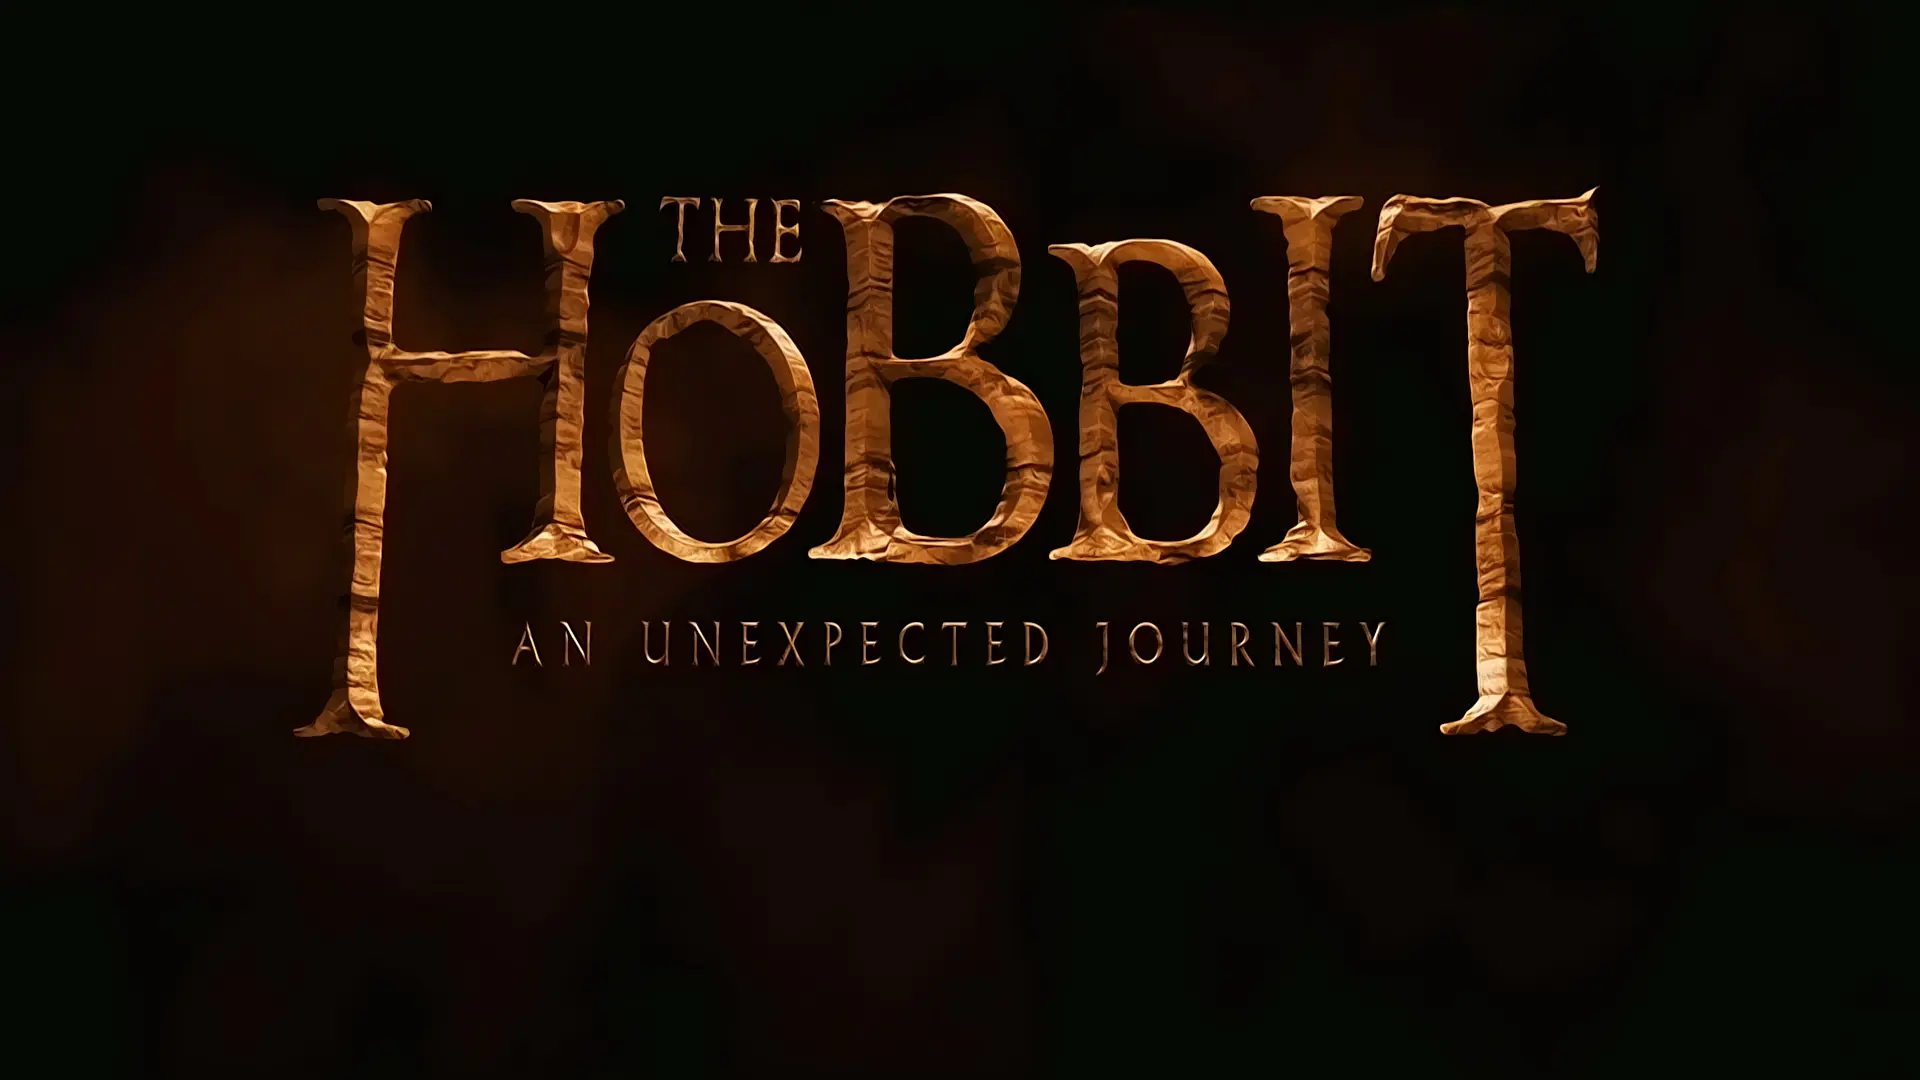 Movie The Hobbit an Unexpected Journey wallpaper 7 | Background Image